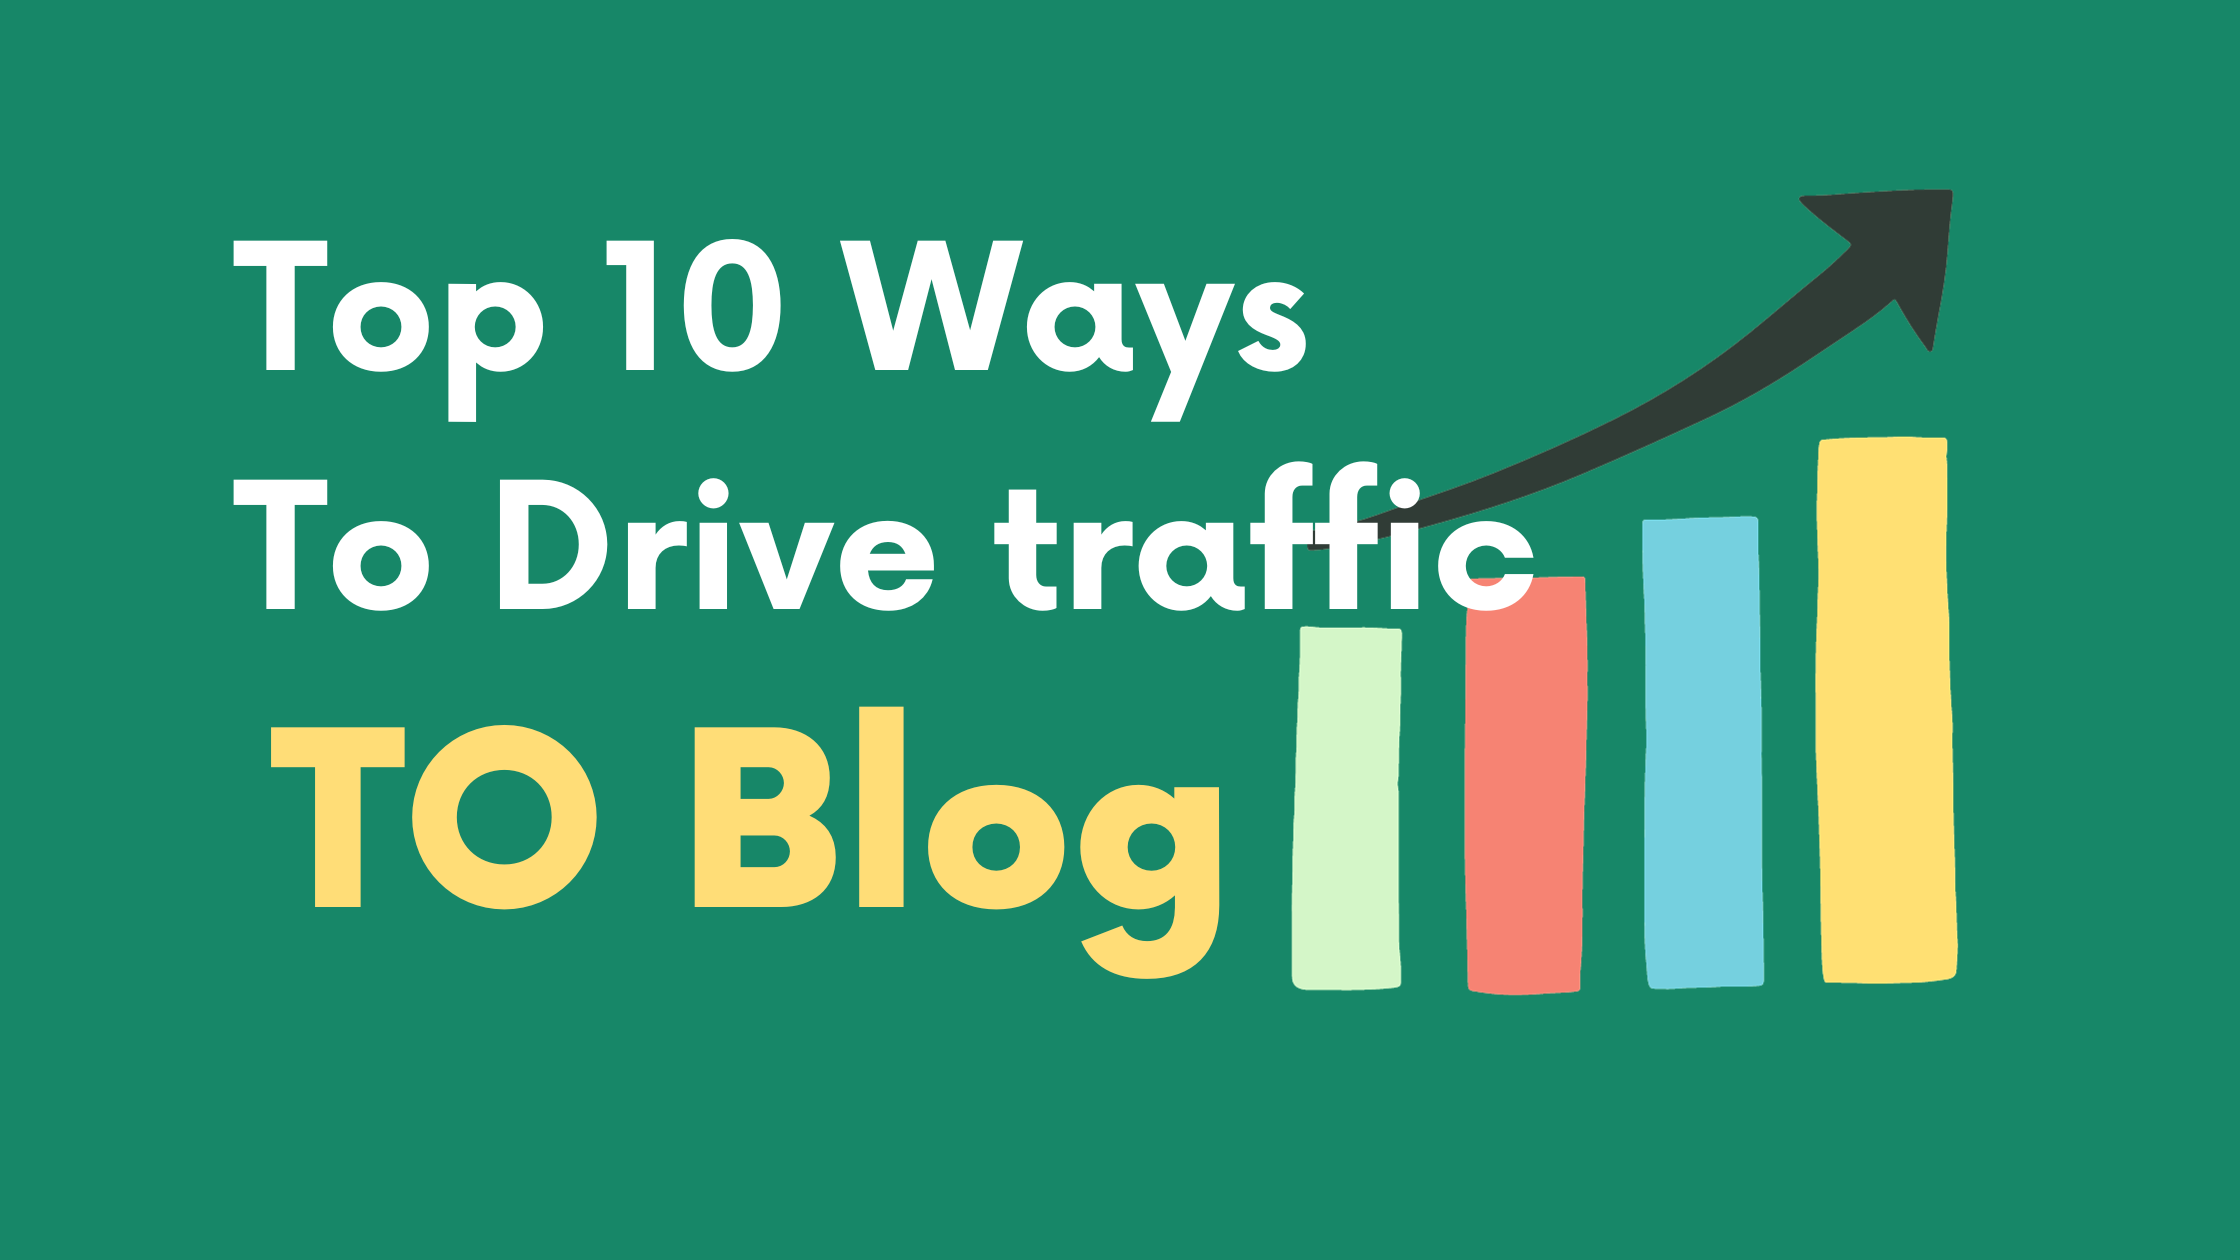 Top 10 ways to drive traffic to blog